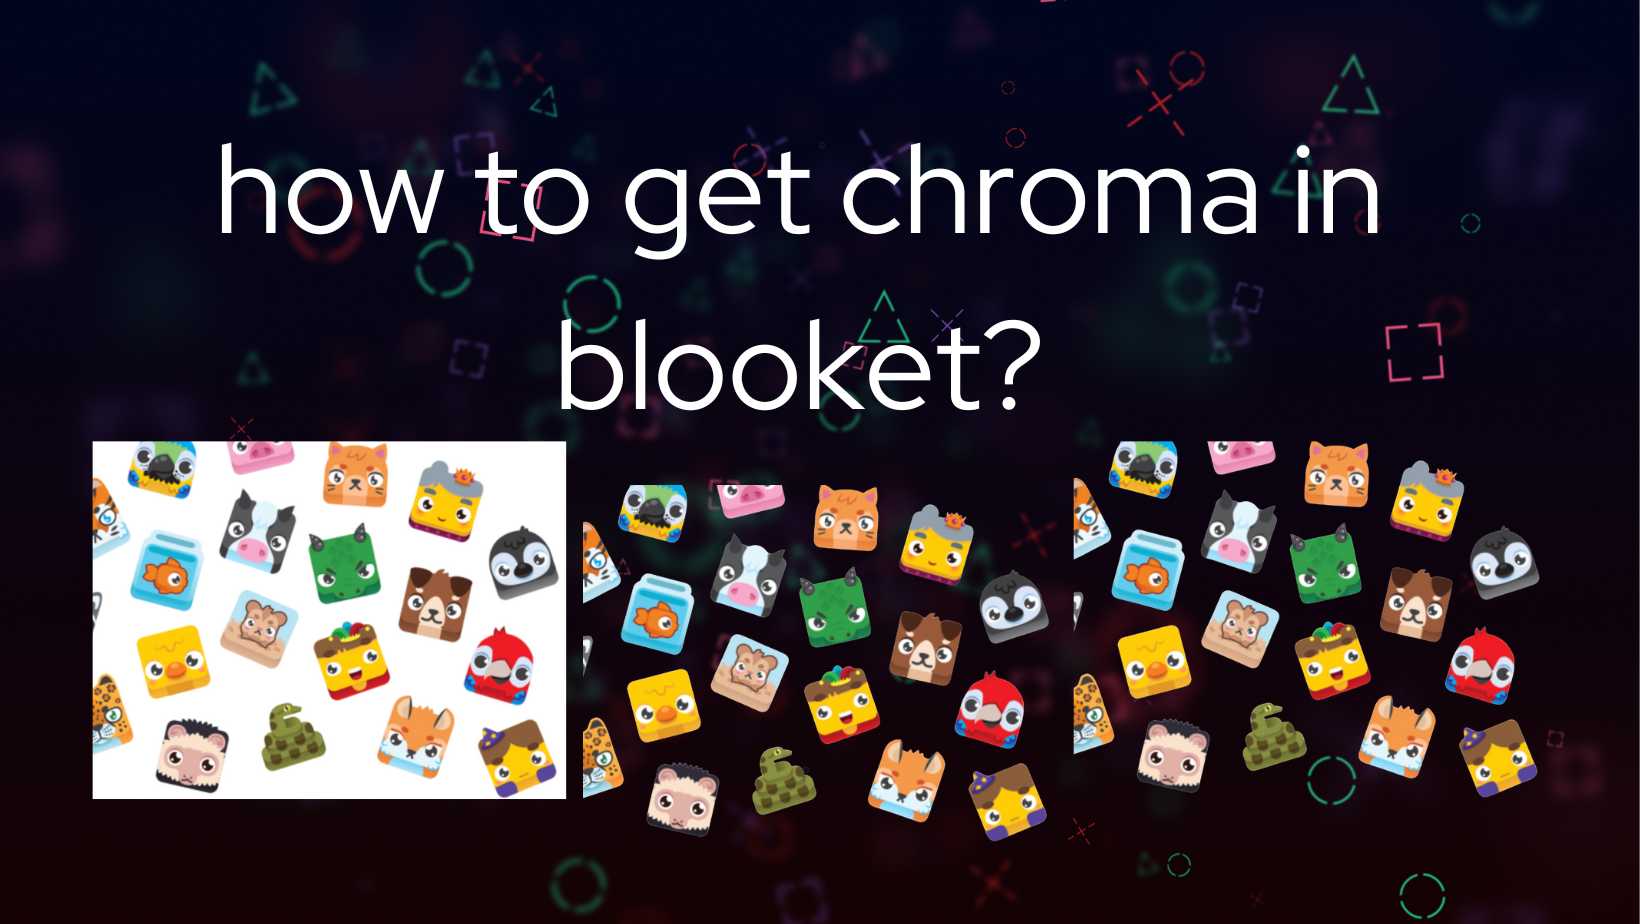 how to get chroma in blooket?